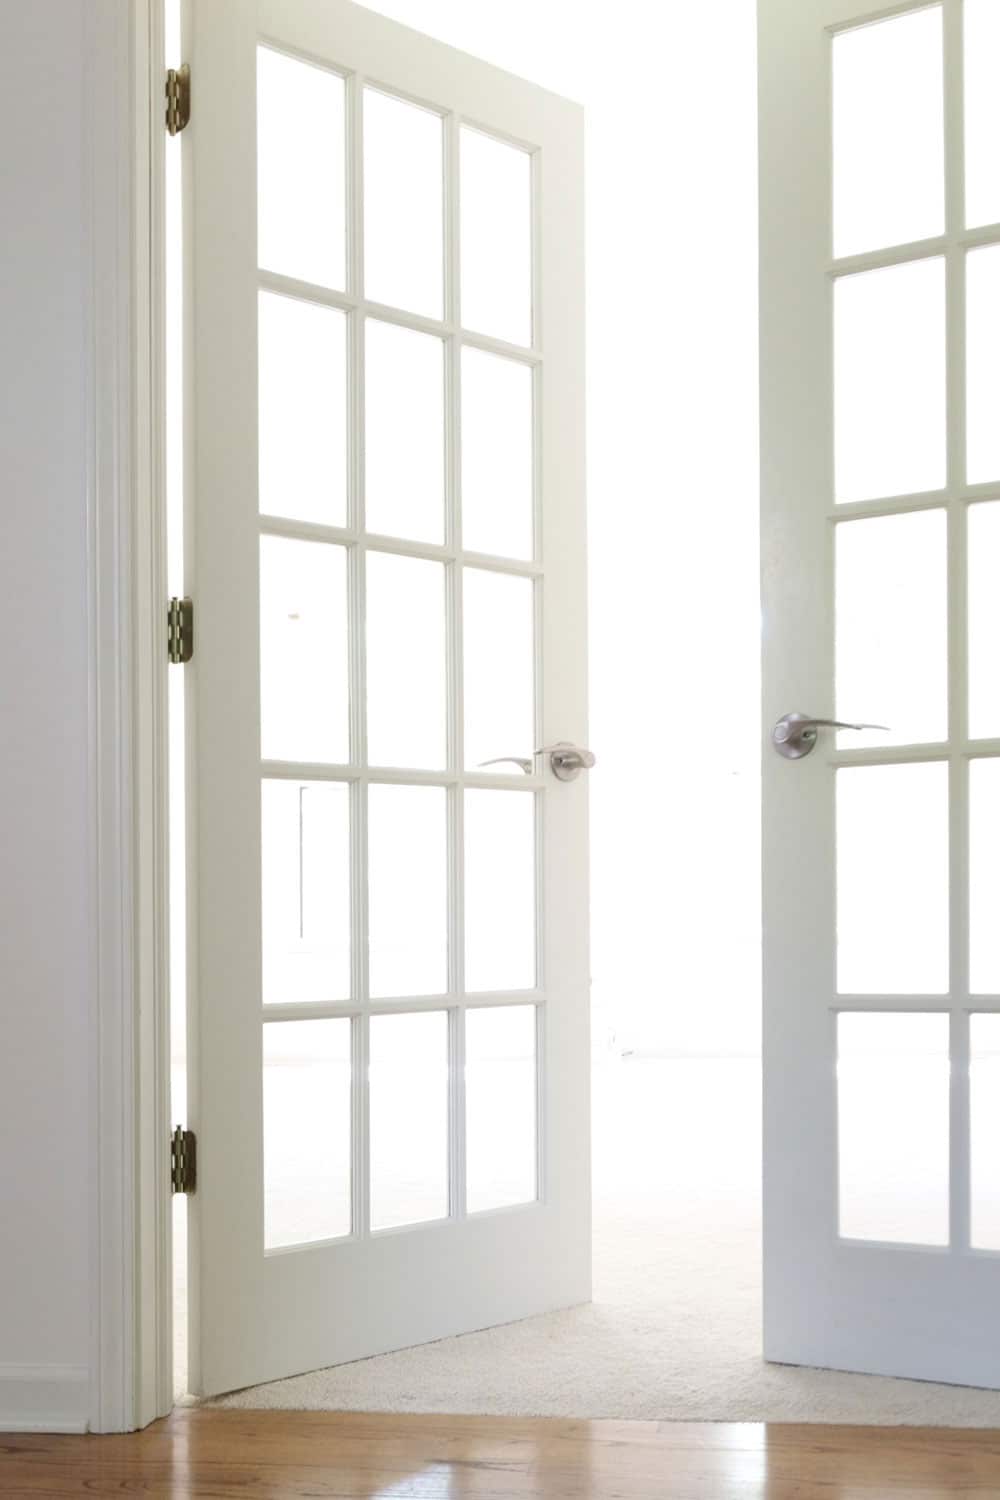 These white french doors will be painted black and new marble levers will replace the outdated hardware.